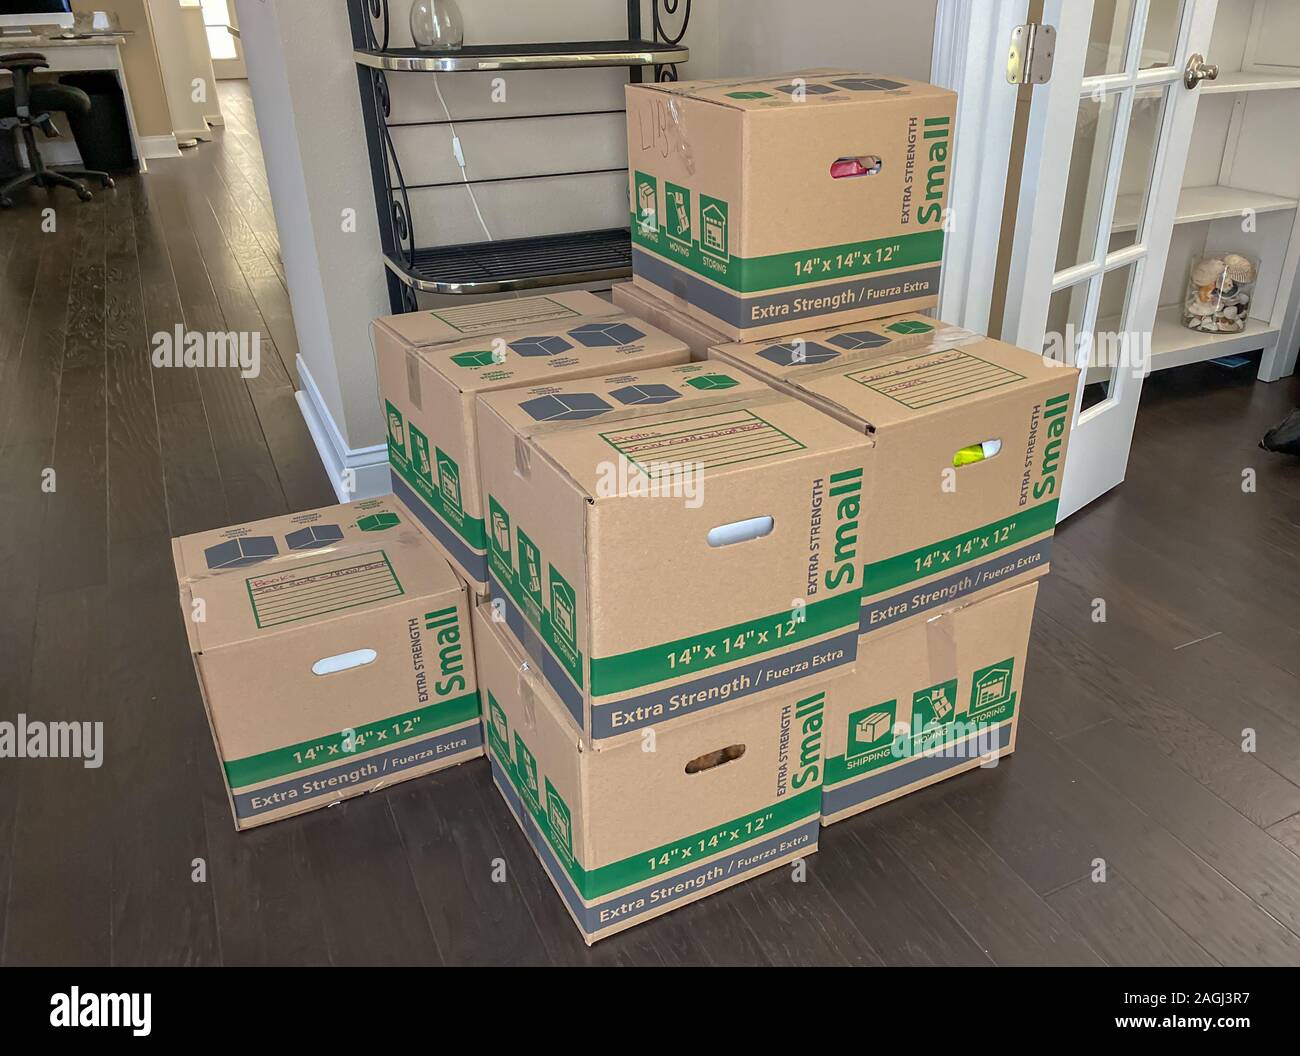 Orlando,FL/USA-11/11/19: A real life moving boxes packed and ready for the movers to take them to their new home. Stock Photo